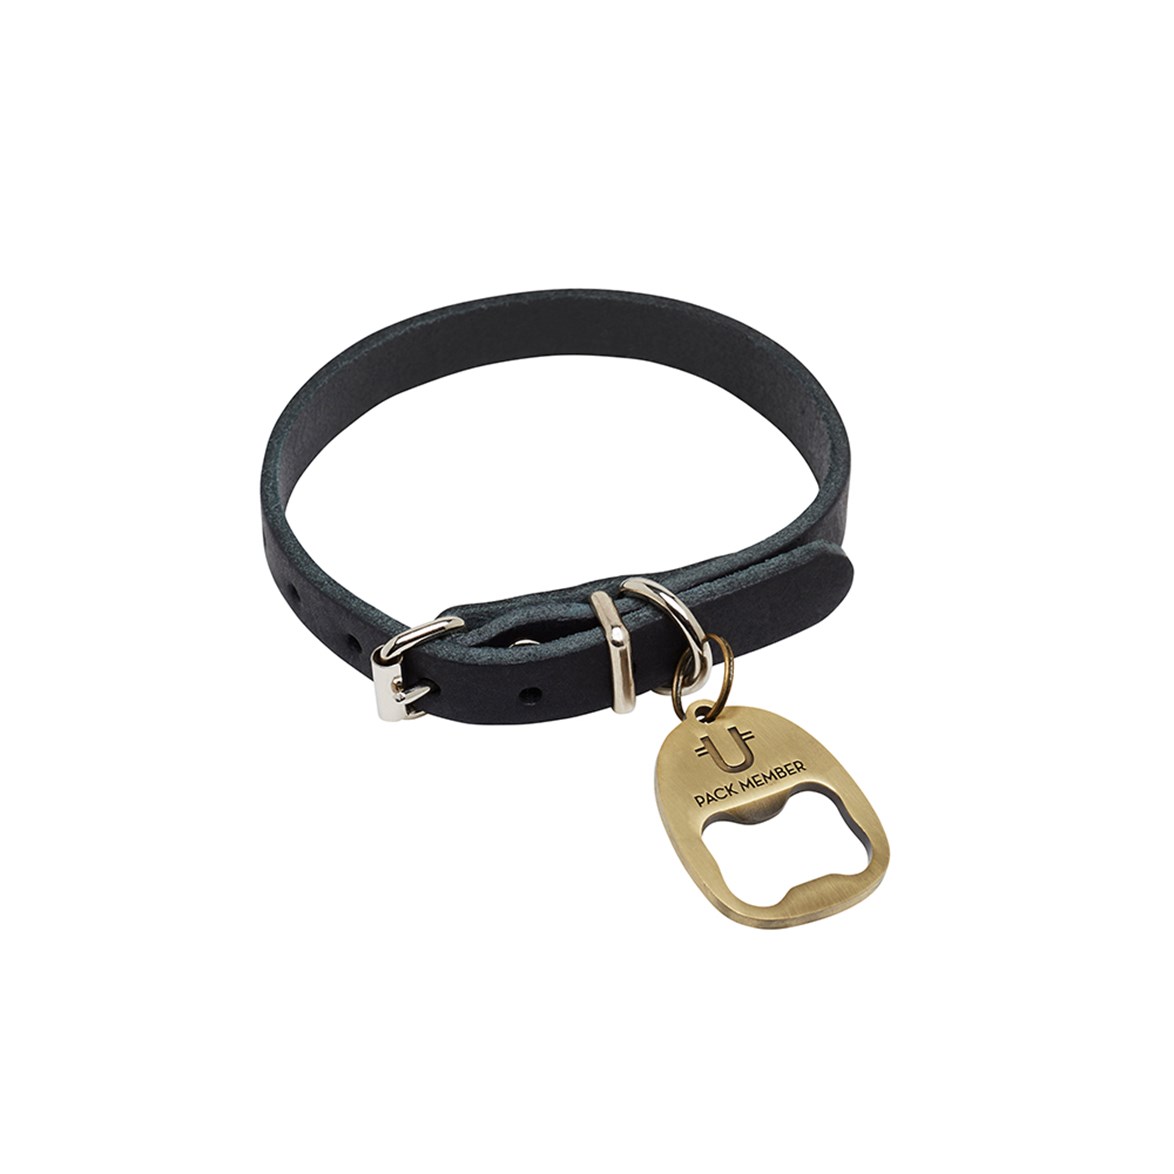 **[Dog tag bottle opener collar, $14.95, Pet Haus](https://pethaus.com.au/collections/accessories/products/dog-tag-beer-opener|target="_blank"|rel="nofollow")**<br>
Both stylish and practical, this dog collar features a bottle opener, proving once again that they really are man's best friend. For an added touch, you can also get it engraved. **[SHOP NOW.](https://pethaus.com.au/products/dog-tag-beer-opener|target="_blank"|rel="nofollow")**